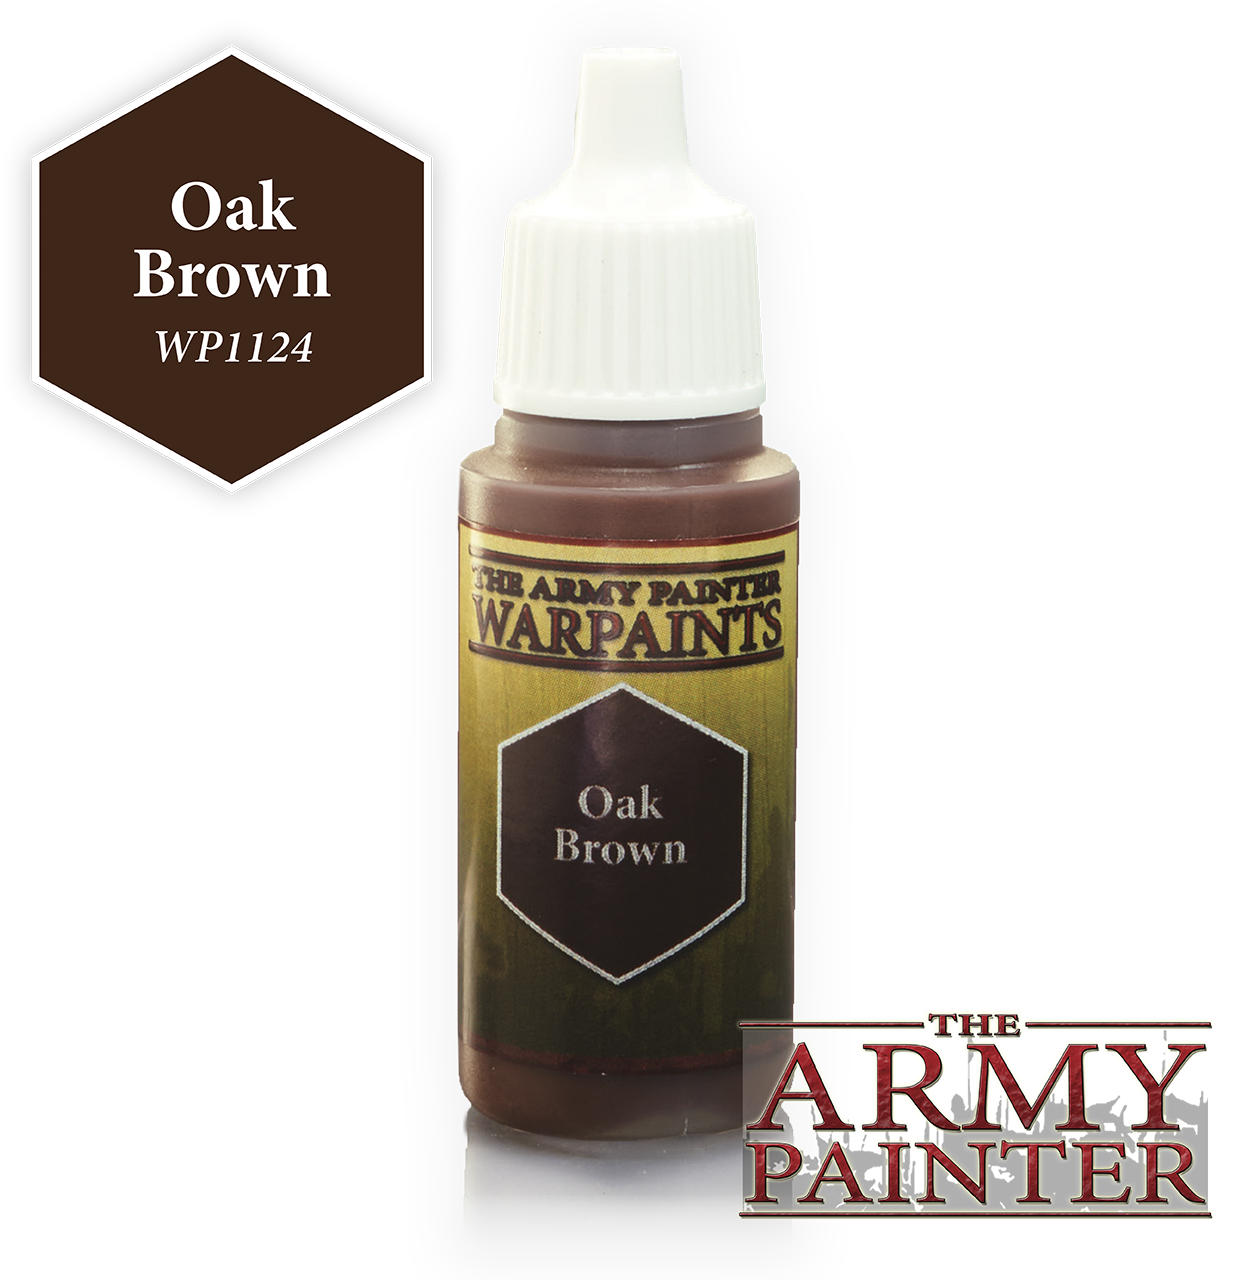 The ARMY PAINTER: Acrylics Warpaint - Oak Brown | Tacoma Games